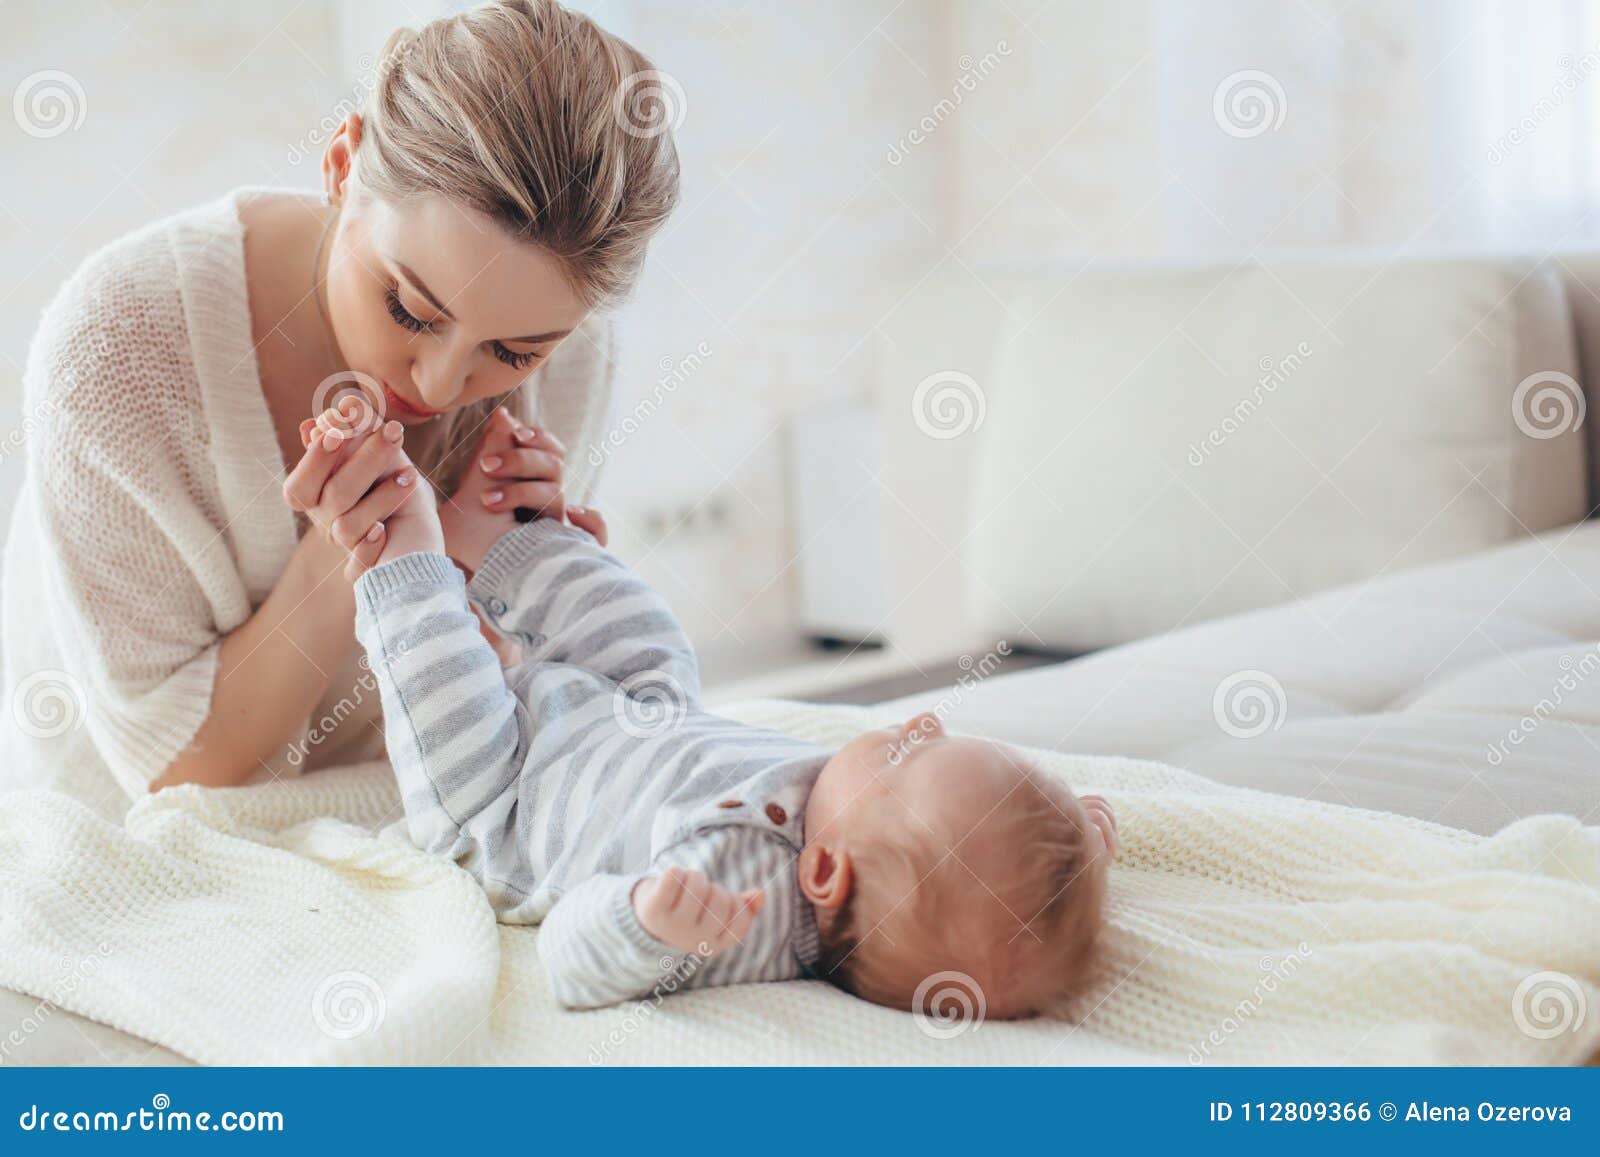 2 month old baby with mom stock photo. Image of love - 112809366